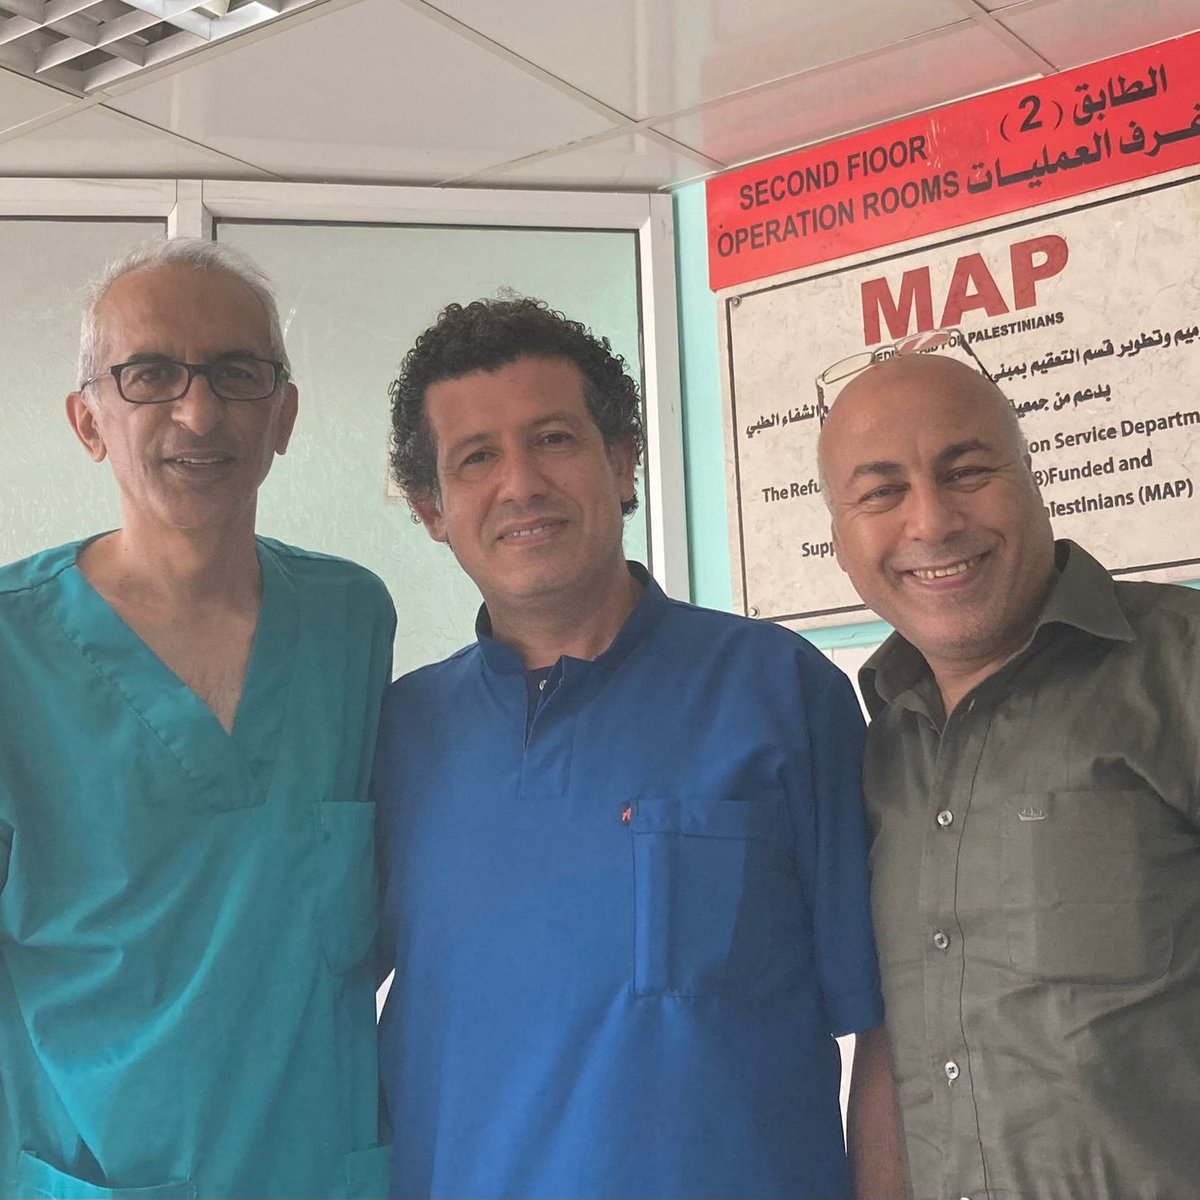 We are deeply concerned to learn that one of Gaza's most senior orthopedic surgeons, Dr Adnan Al Bursh, has died while detained in an Israeli prison. His death must be urgently investigated, amid reports of torture, ill treatment and medical neglect of Palestinian detainees.